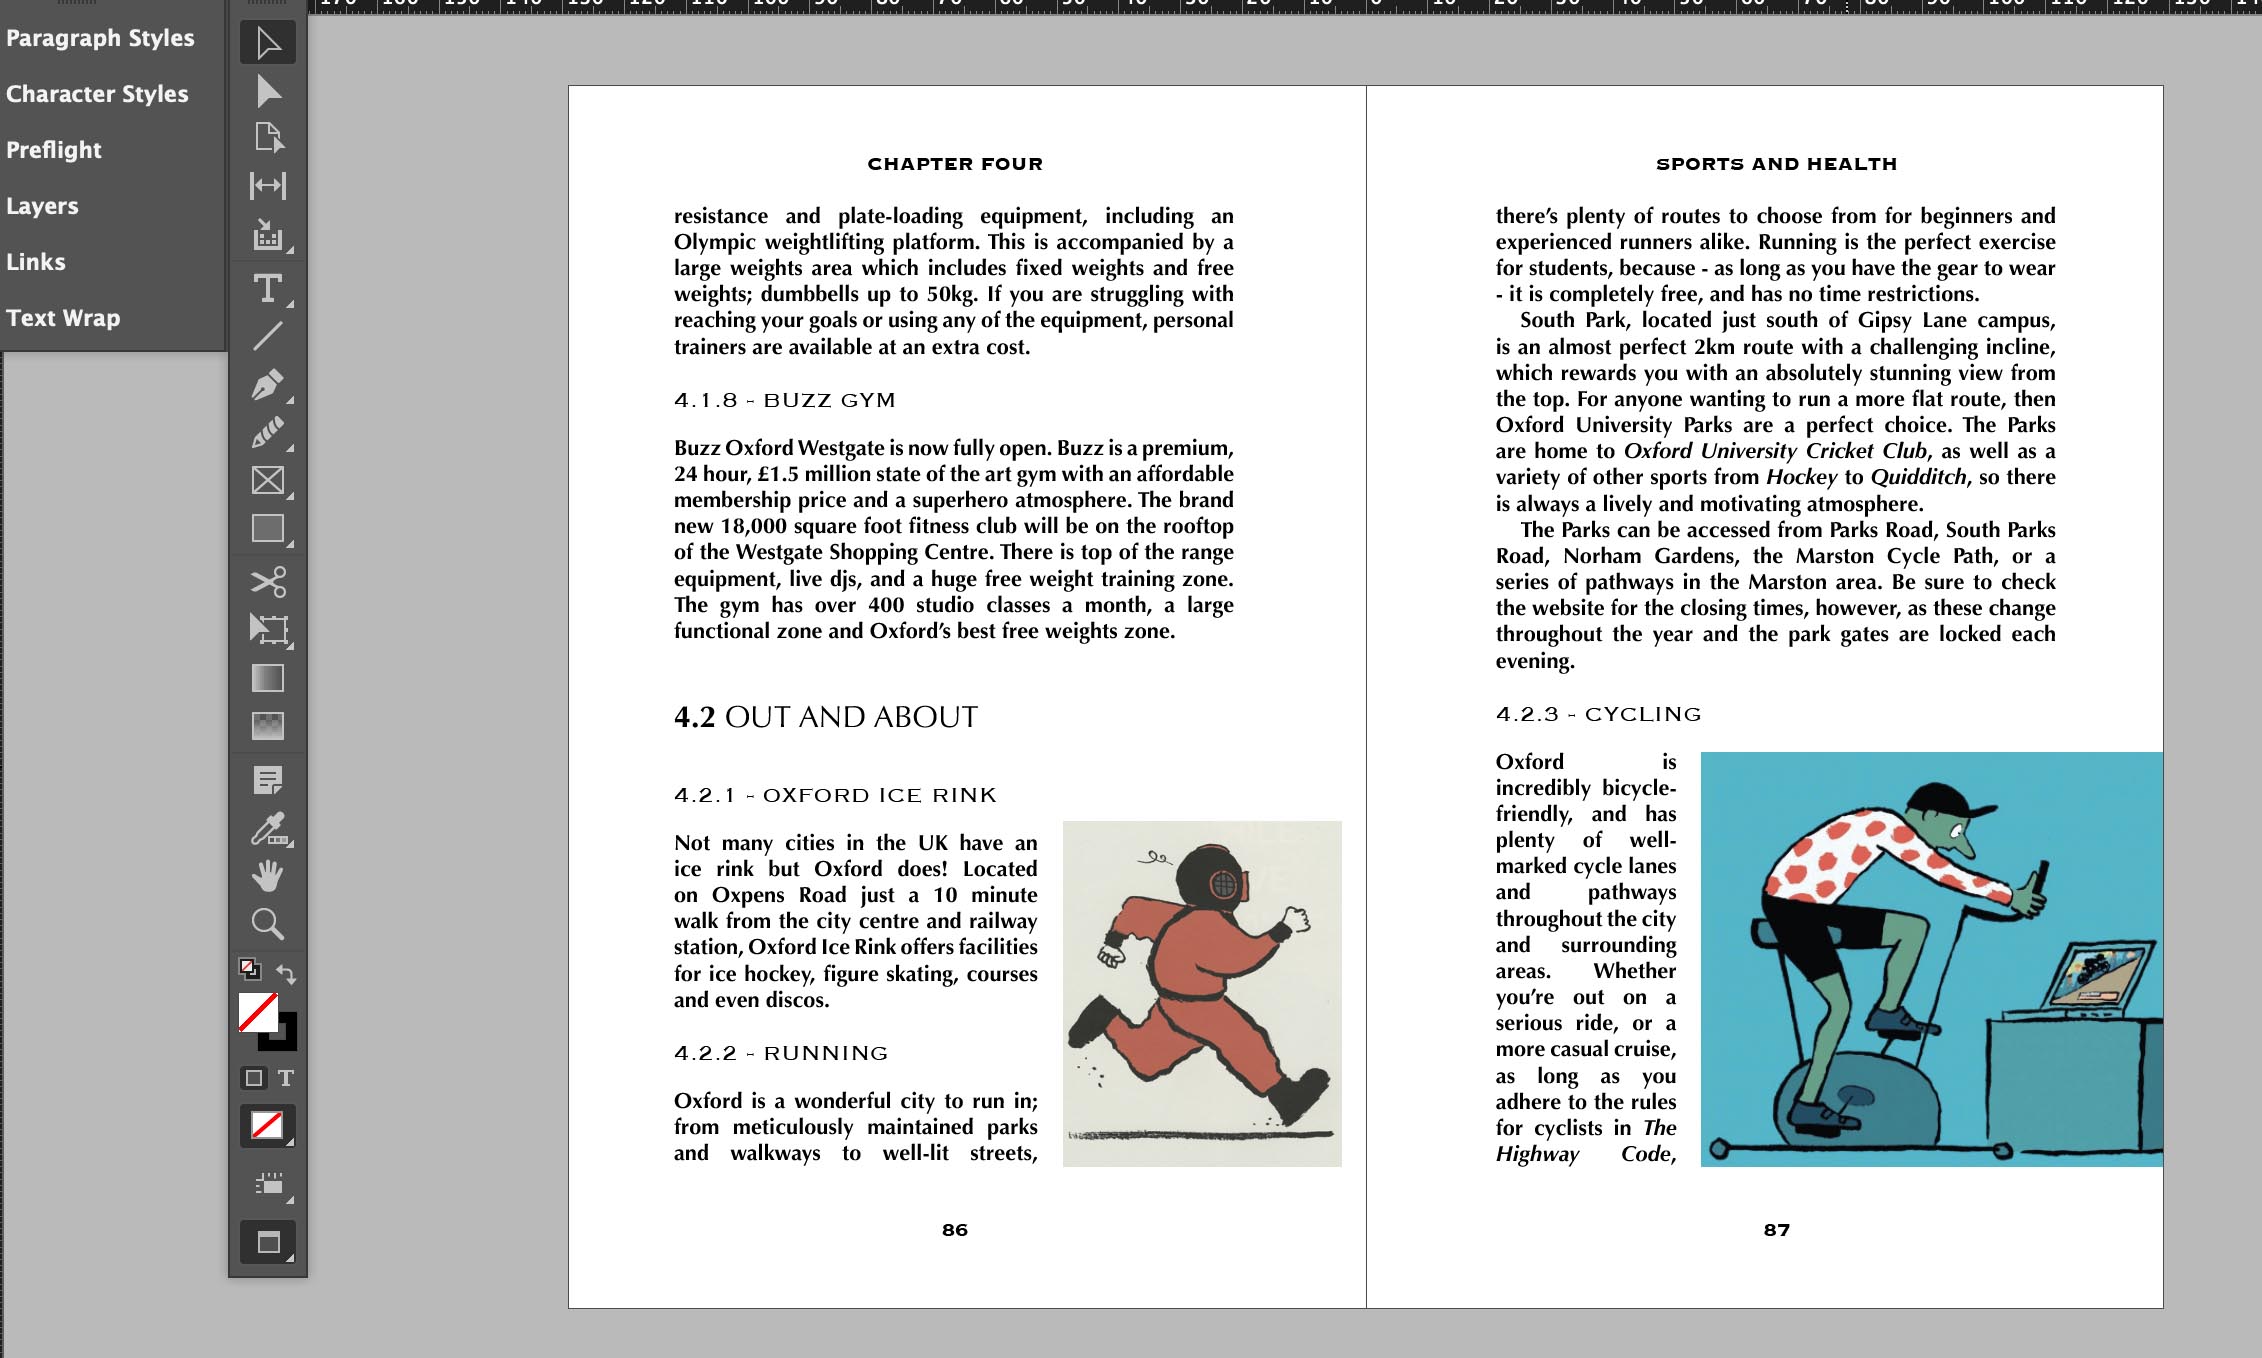 An example of a book with character and paragraph styles applied